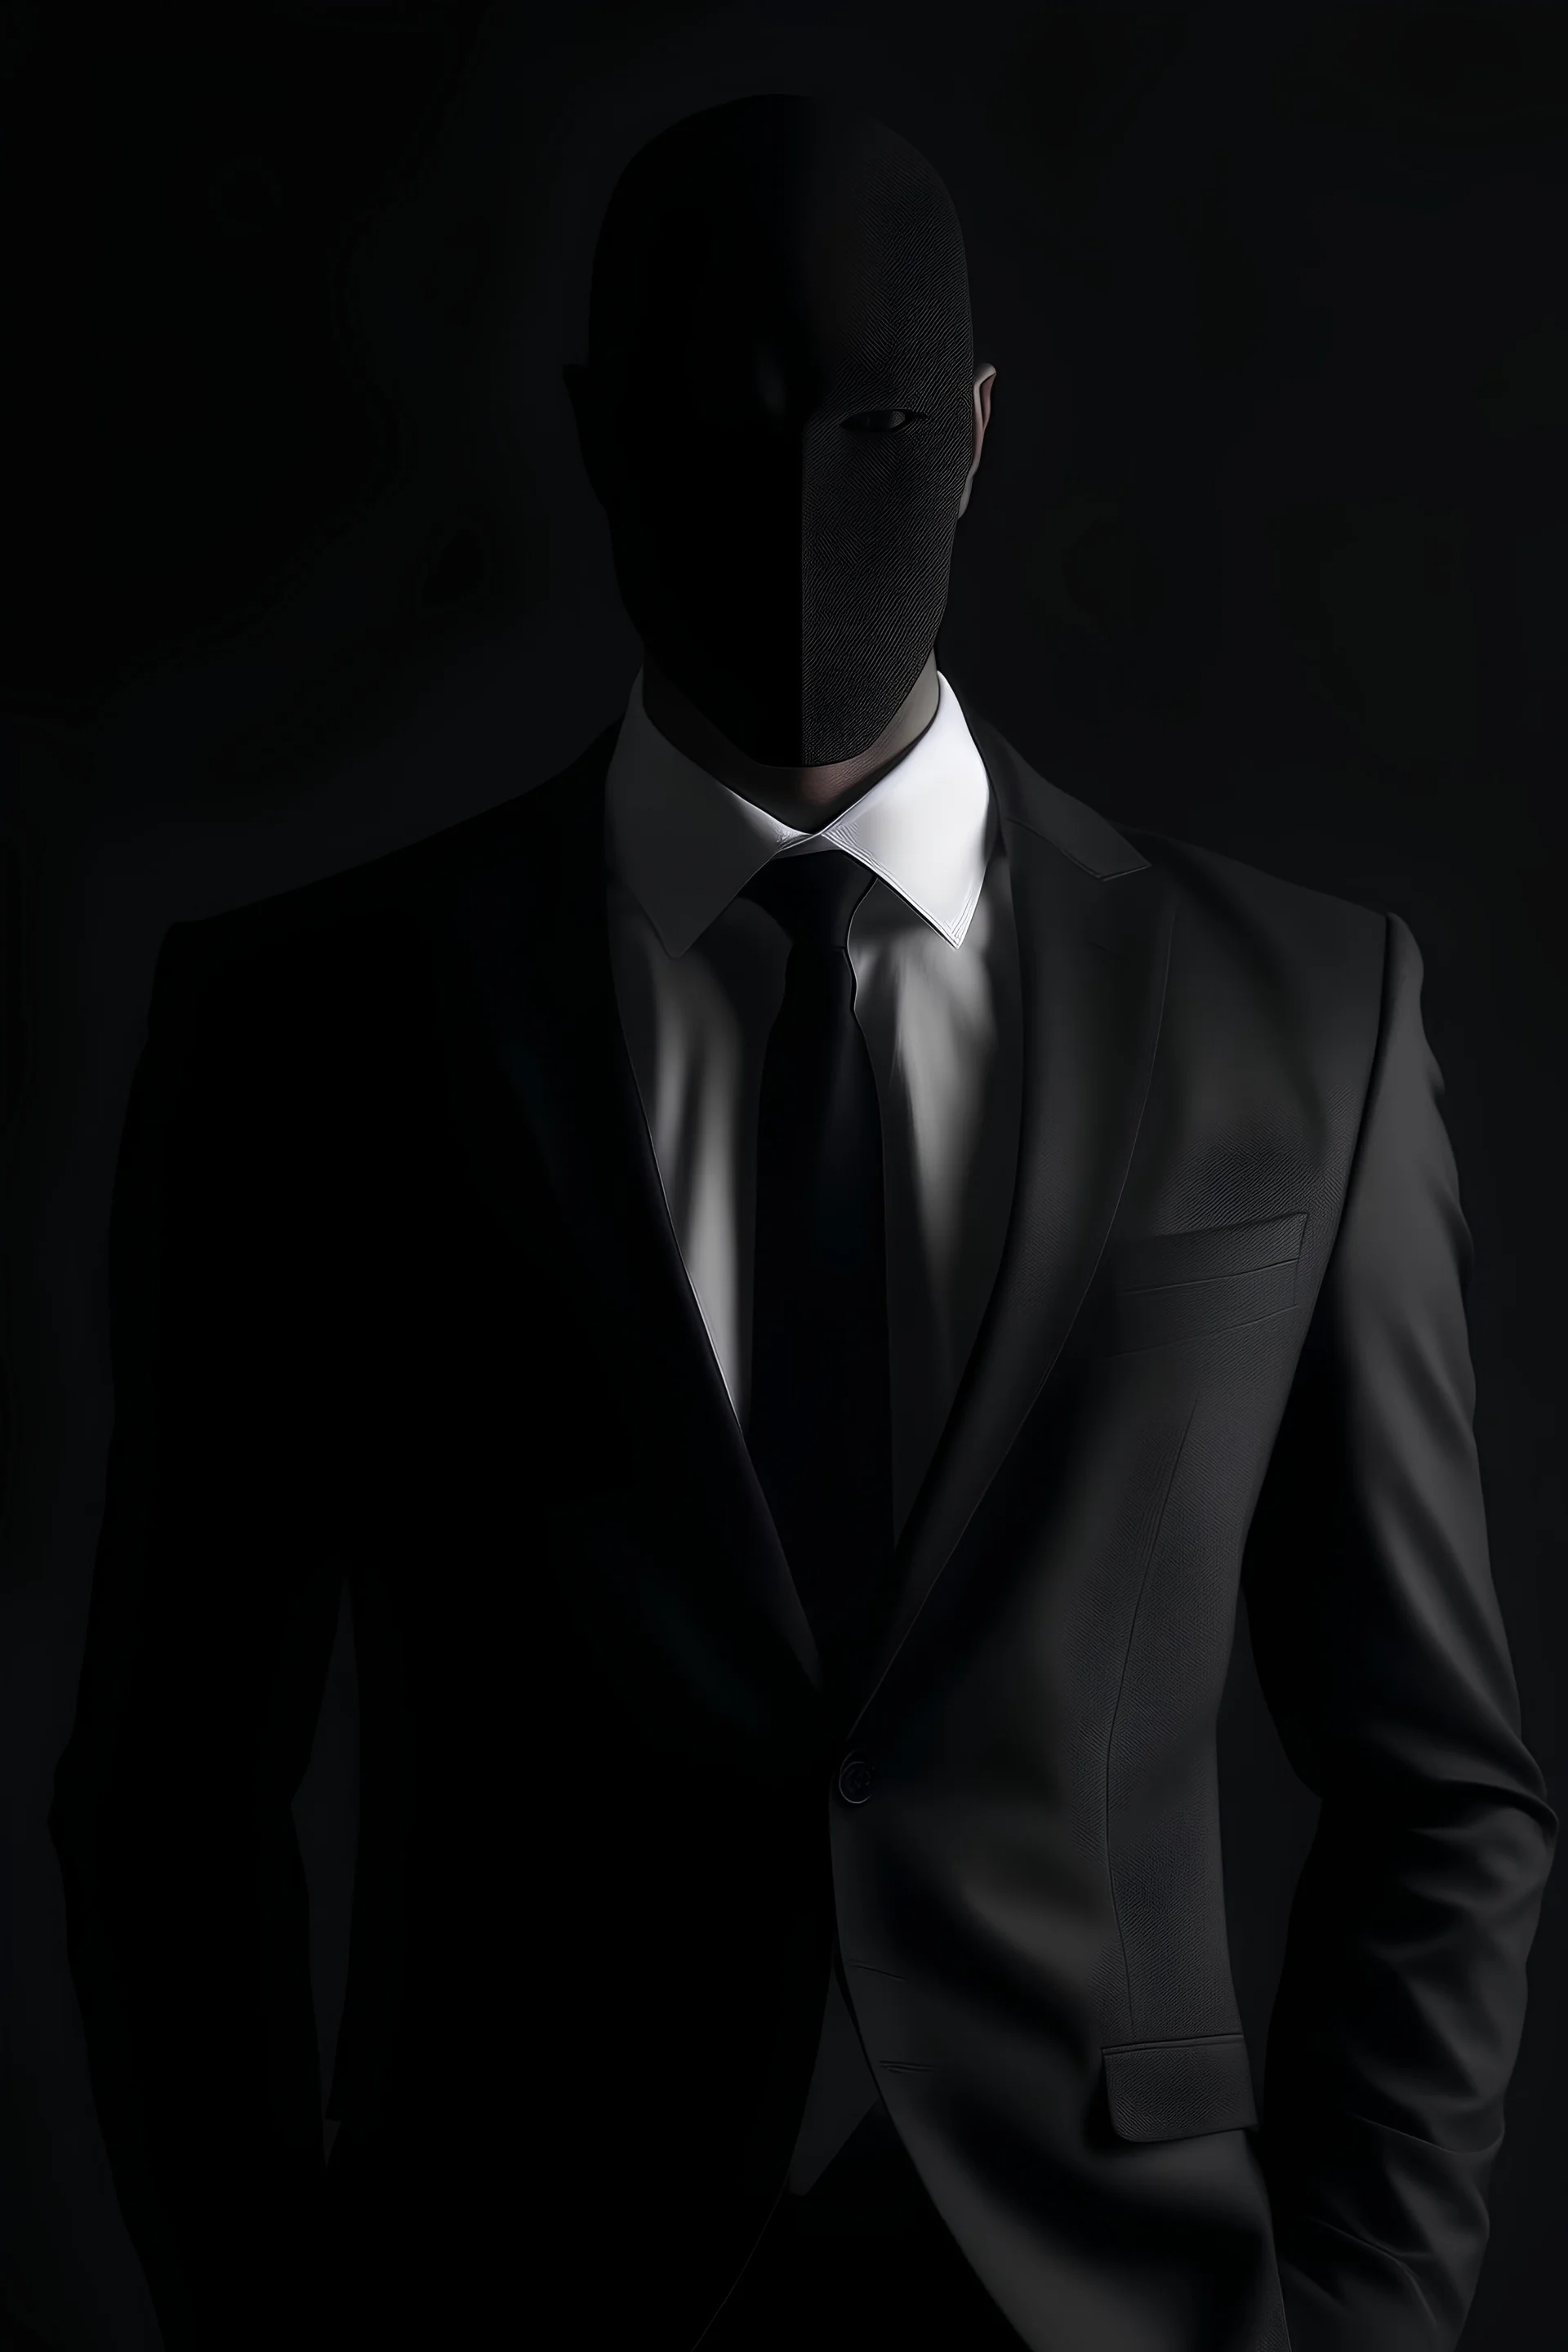 a figure wearing a suit and tie with no face at all